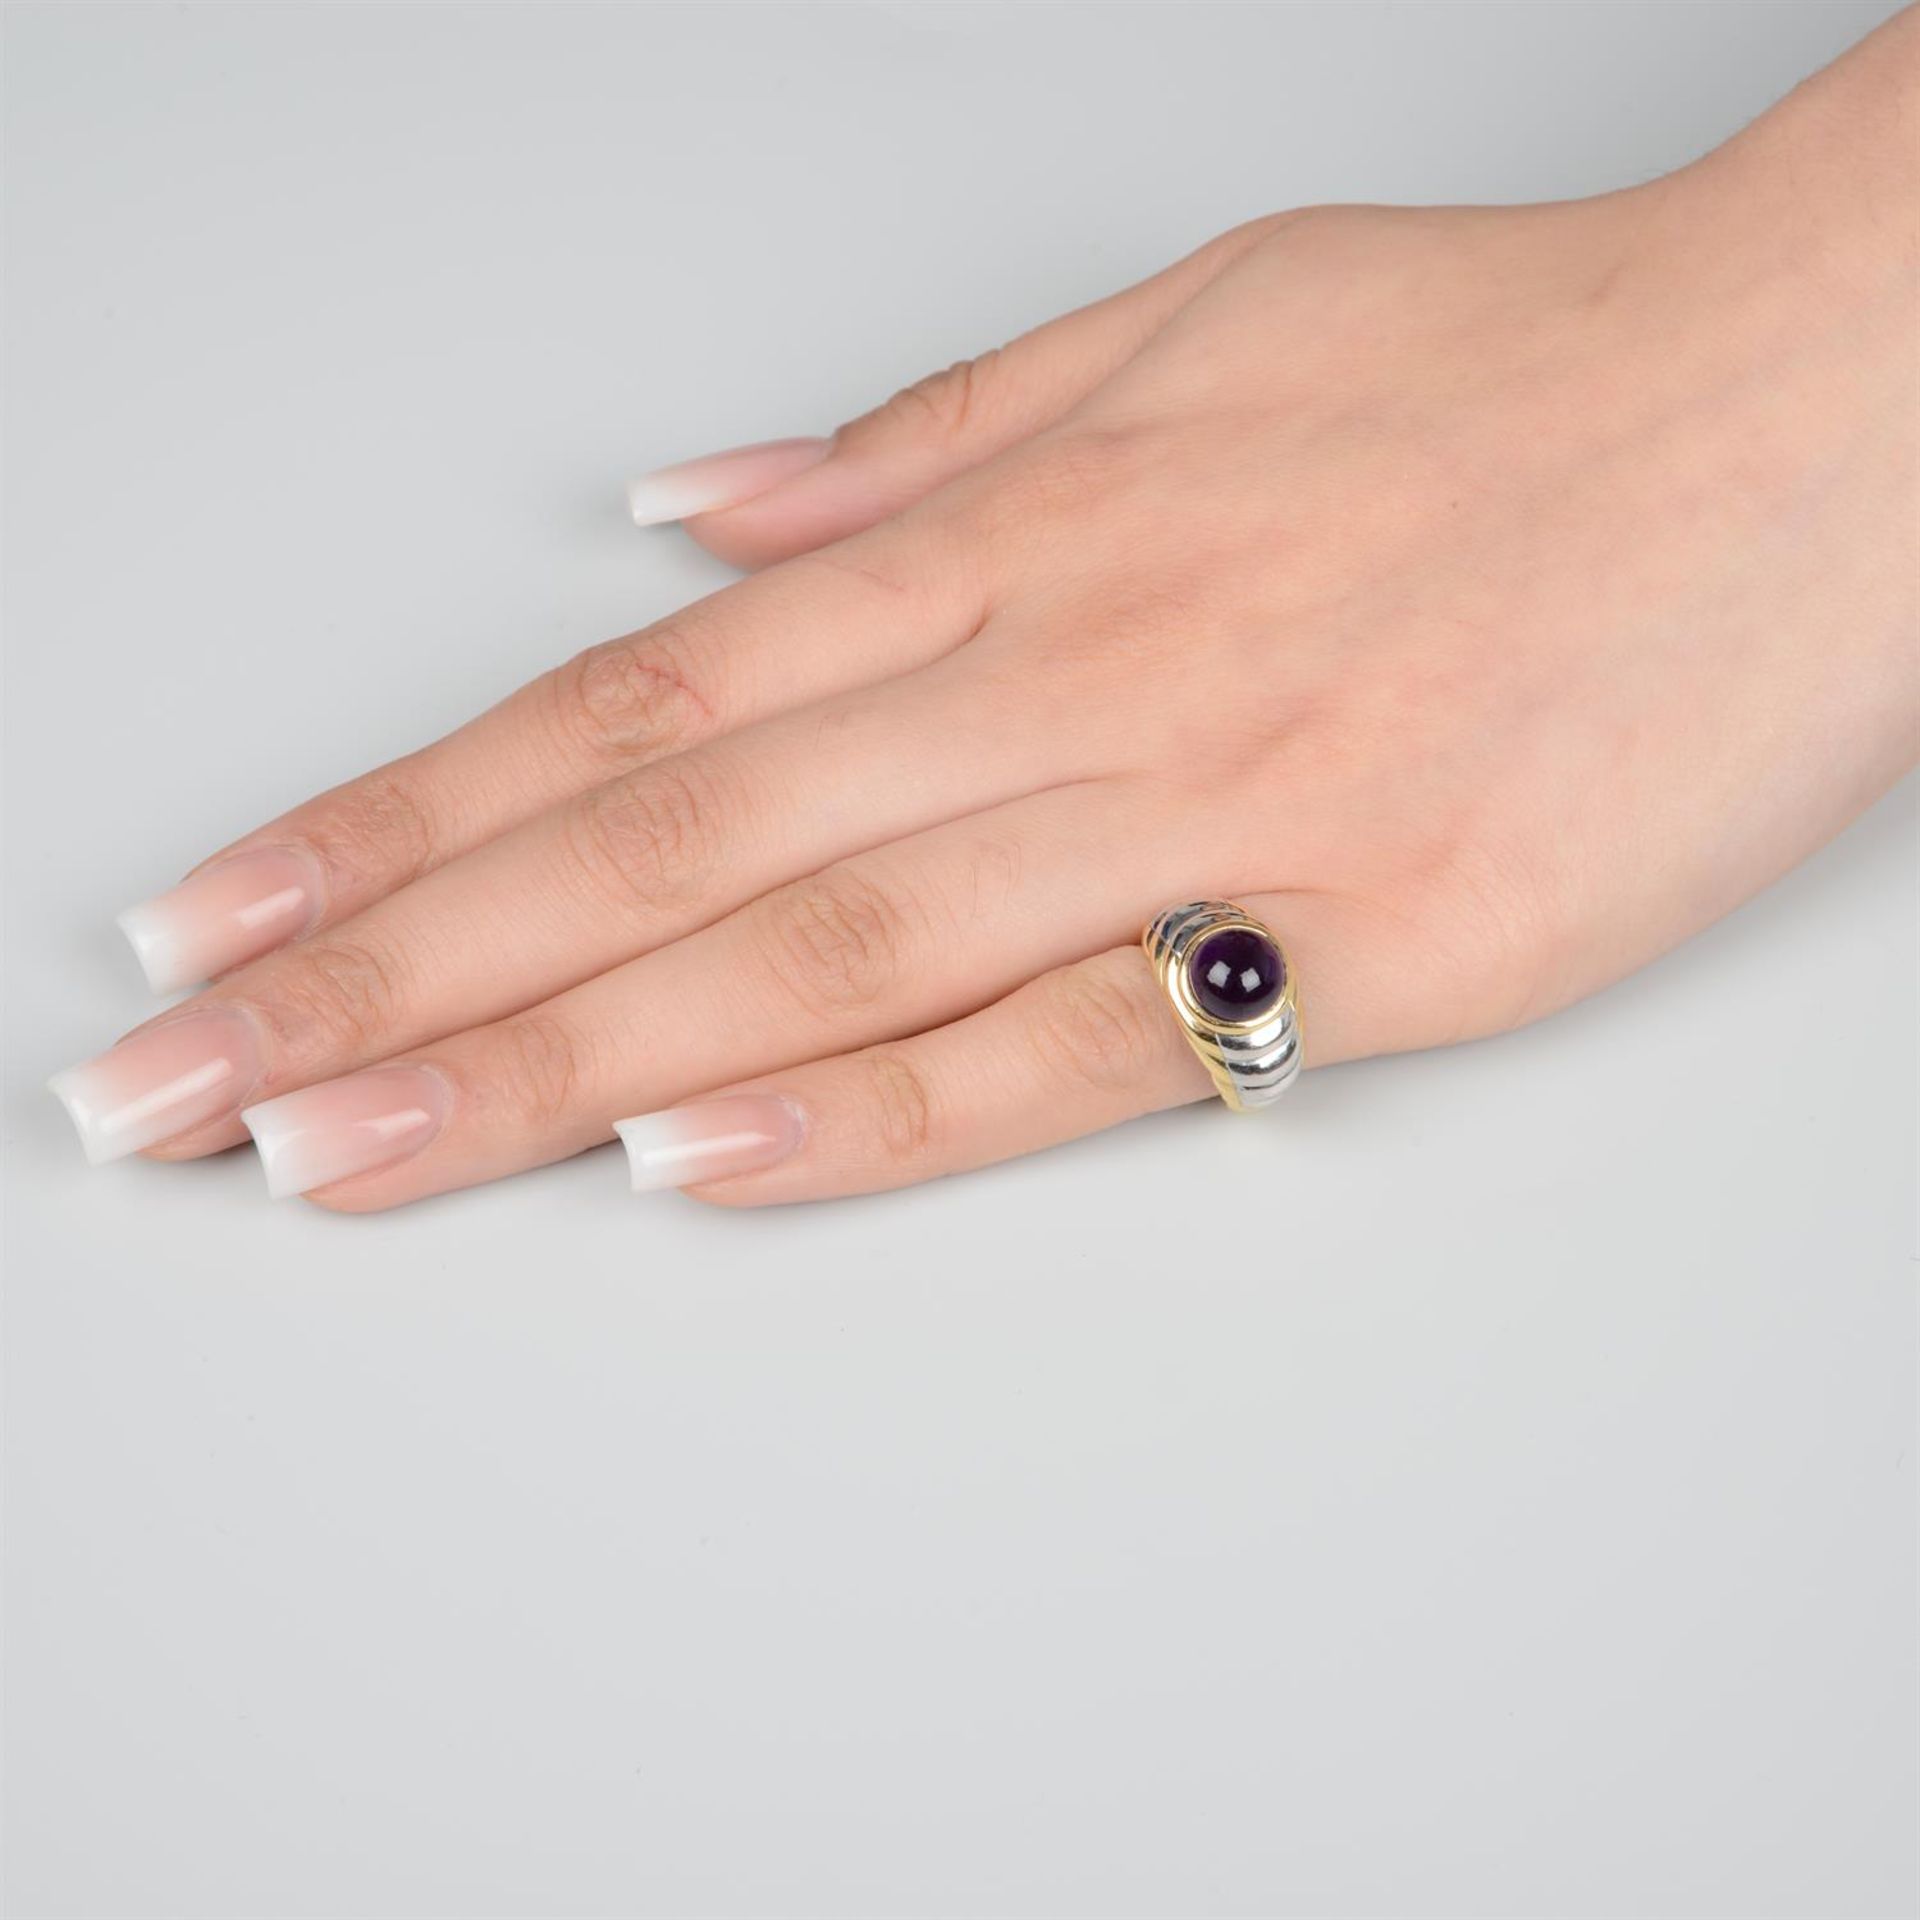 Amethyst ring, by Mauboussin - Image 5 of 5